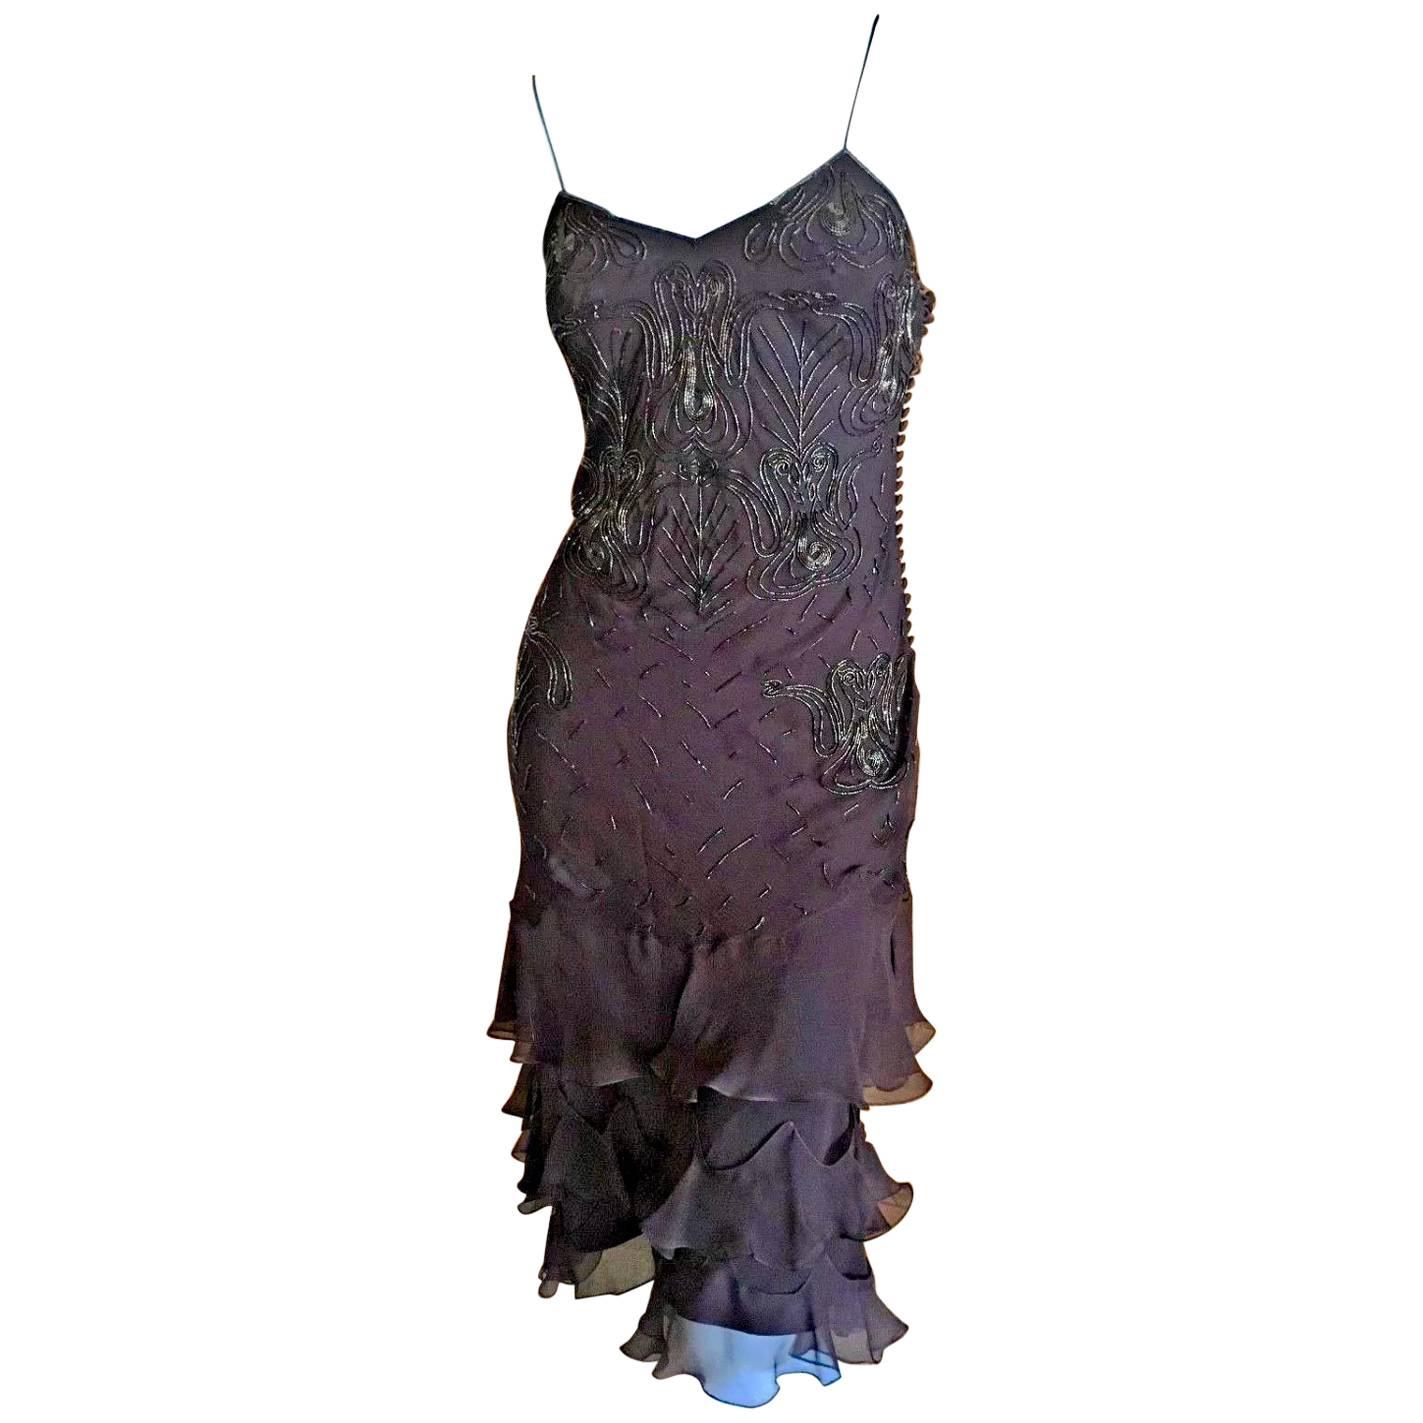 Christian Dior Bead Embellished Silk Chiffon Cocktail Dress by John Galliano  For Sale